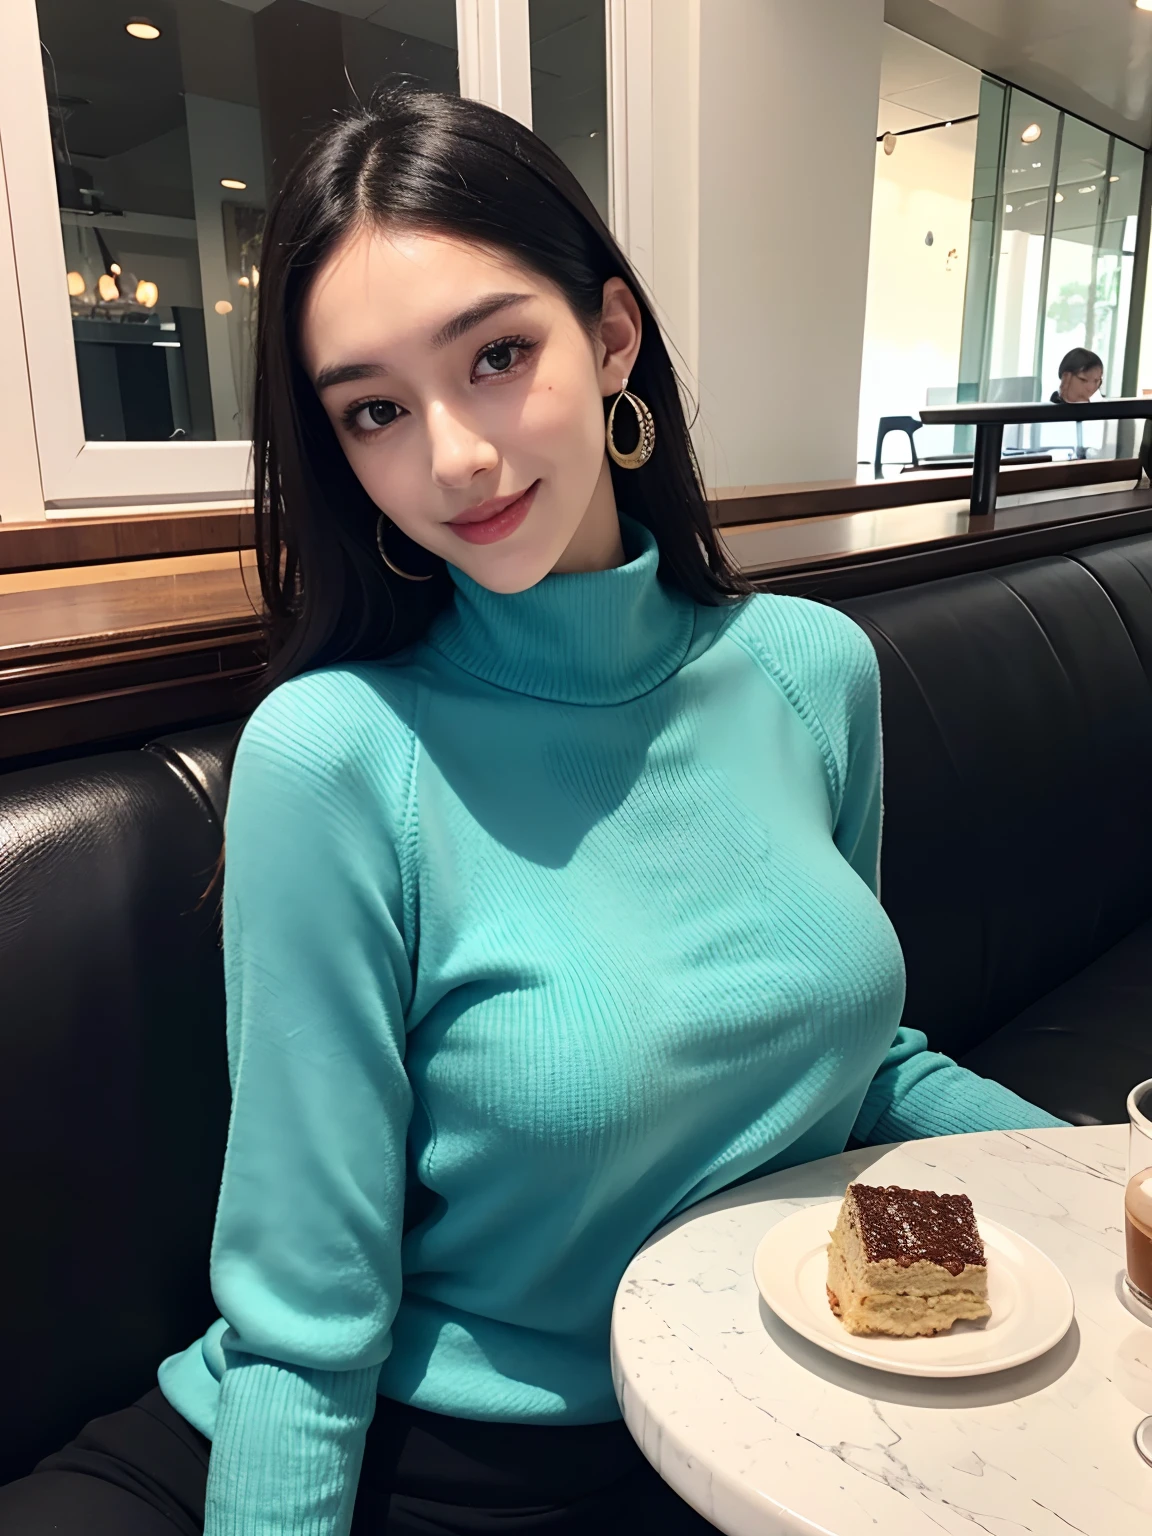 18 year old girl with perfect face and big breasts, cute clothes